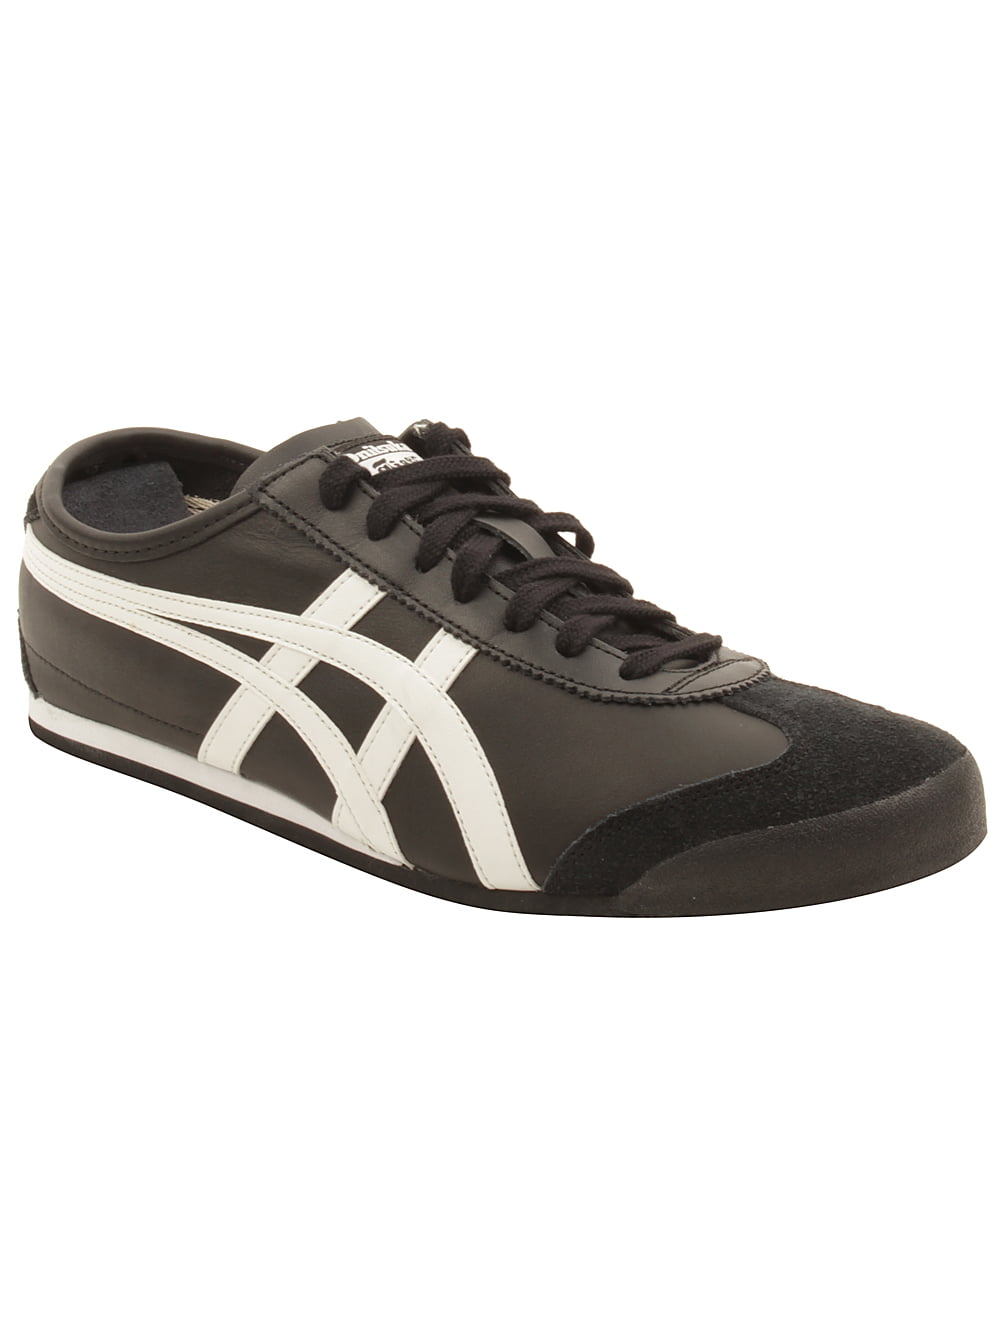 Onitsuka by Asics 66 Sneakers in Black/White - Walmart.com